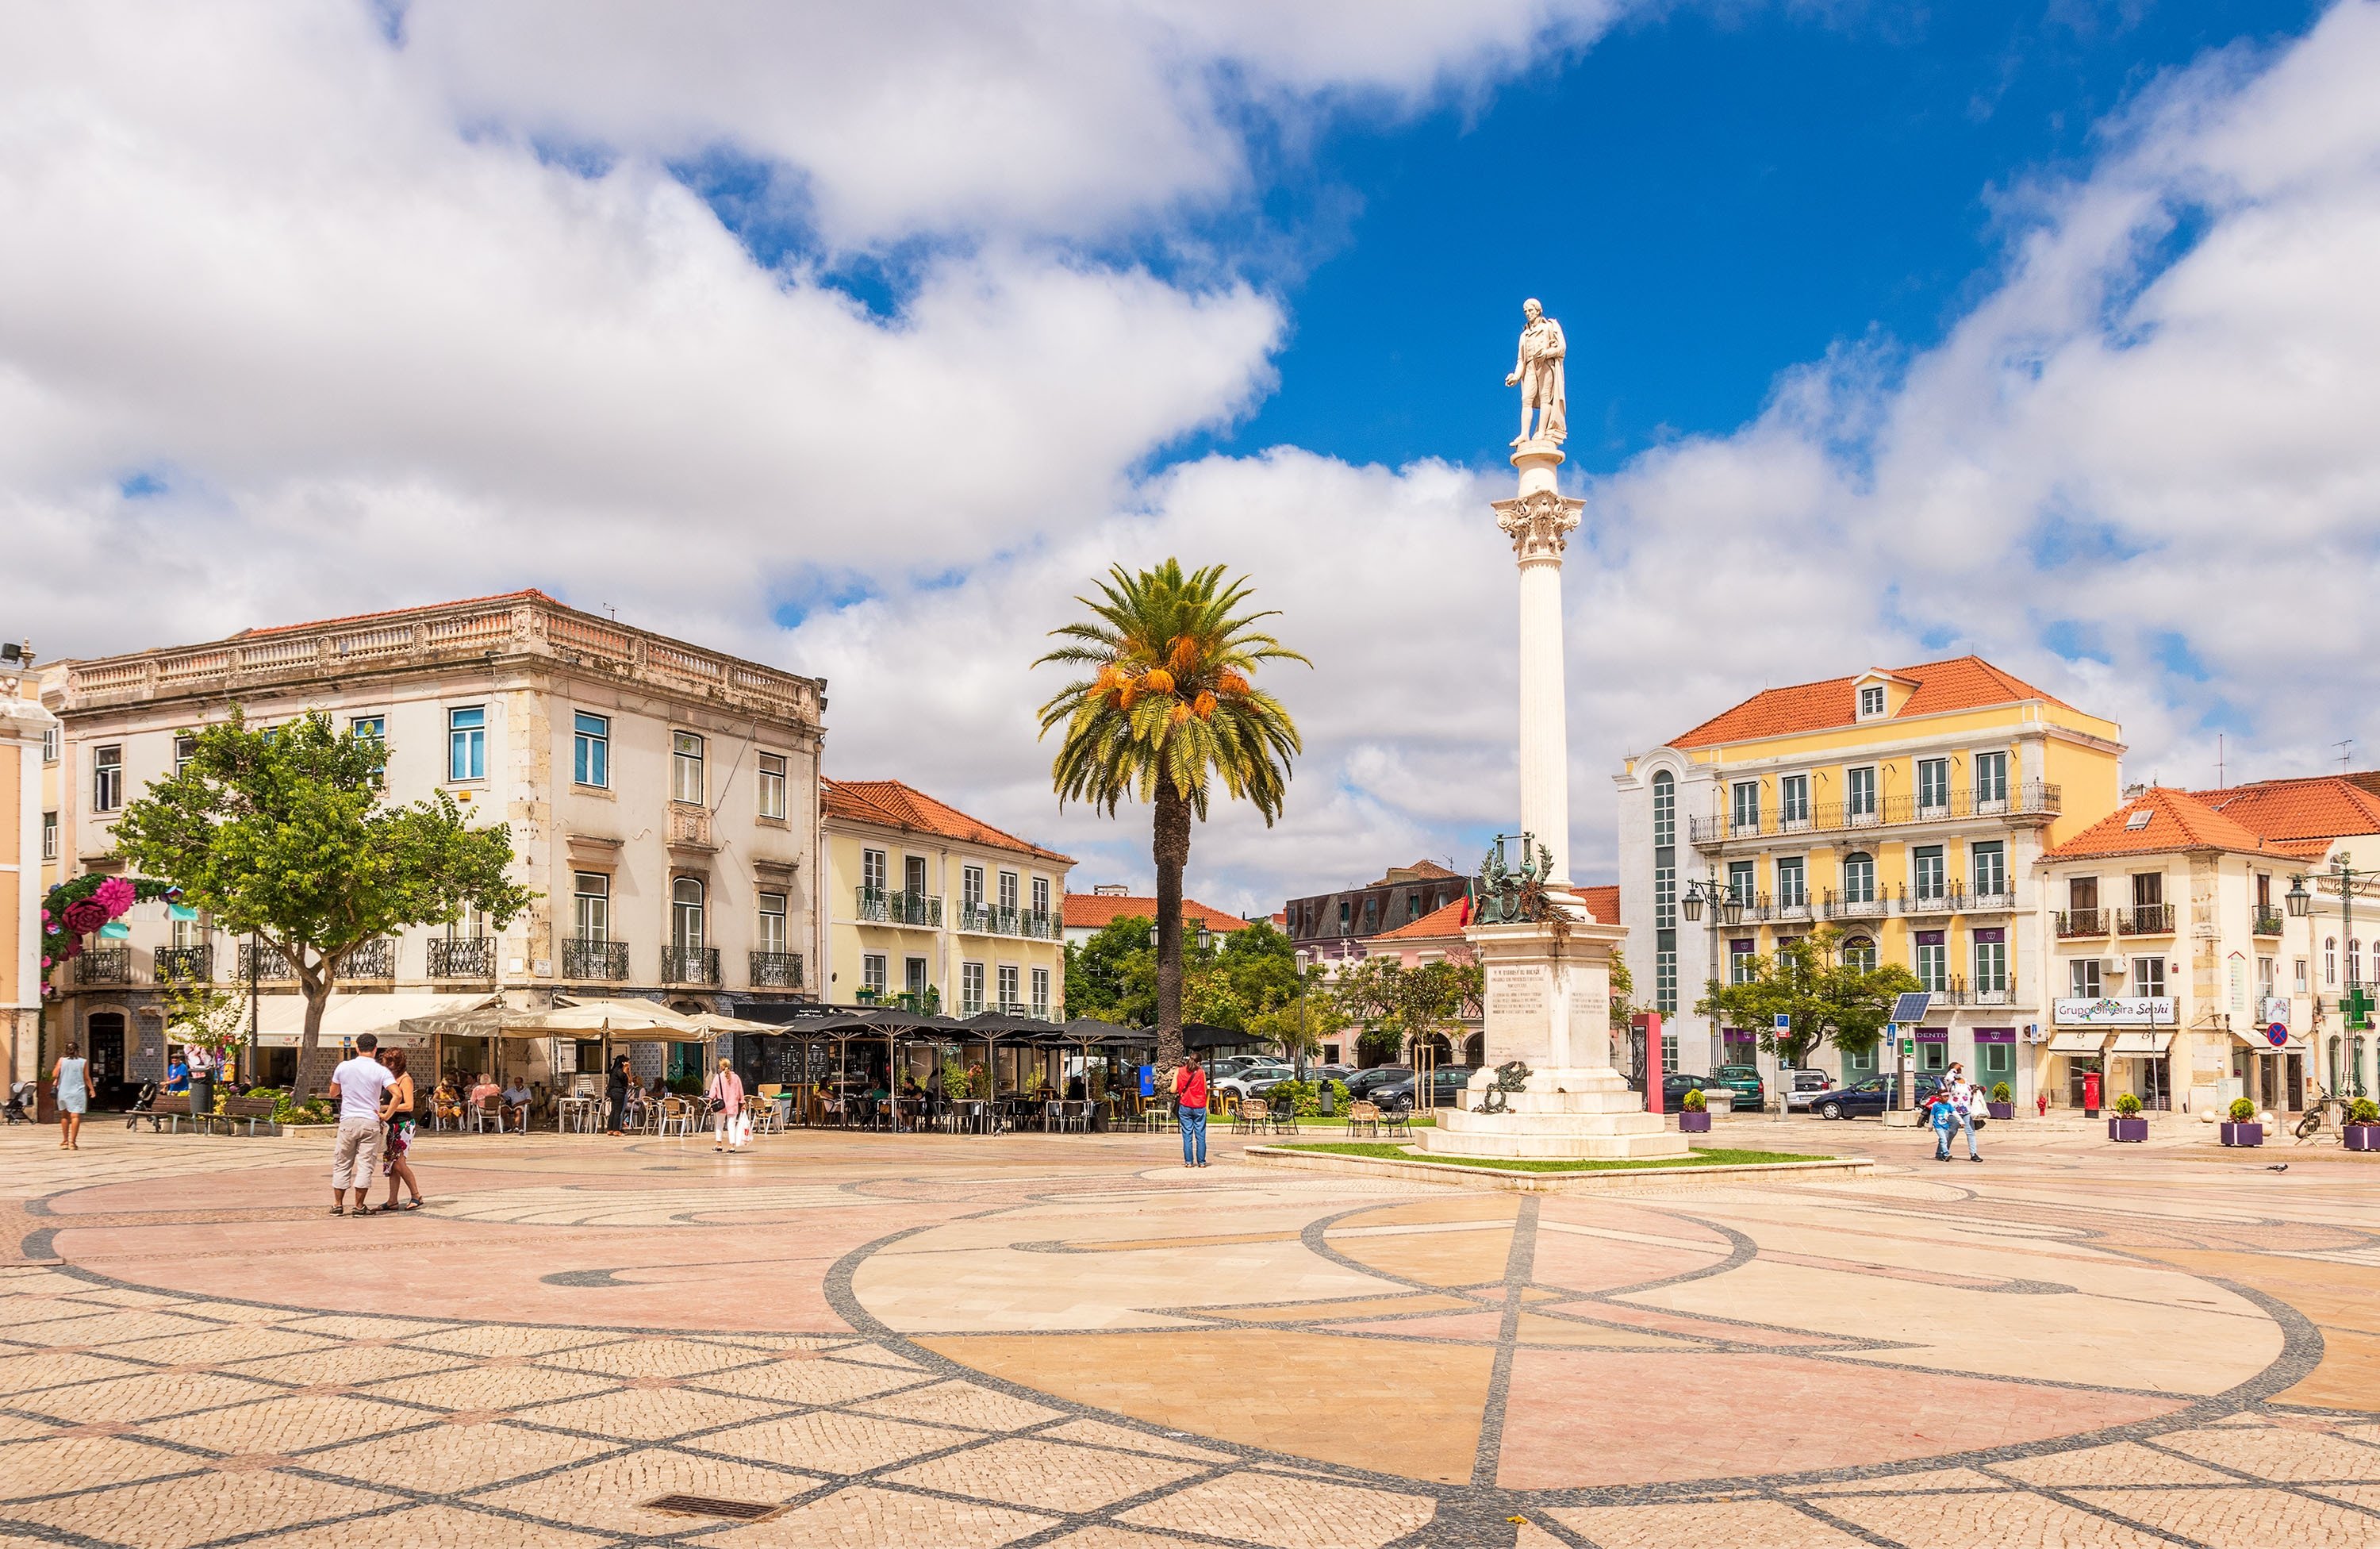 The statue of poet Bocage stands tall in the square named after him in Setubal, Portugal. (Shutterstock Photo)